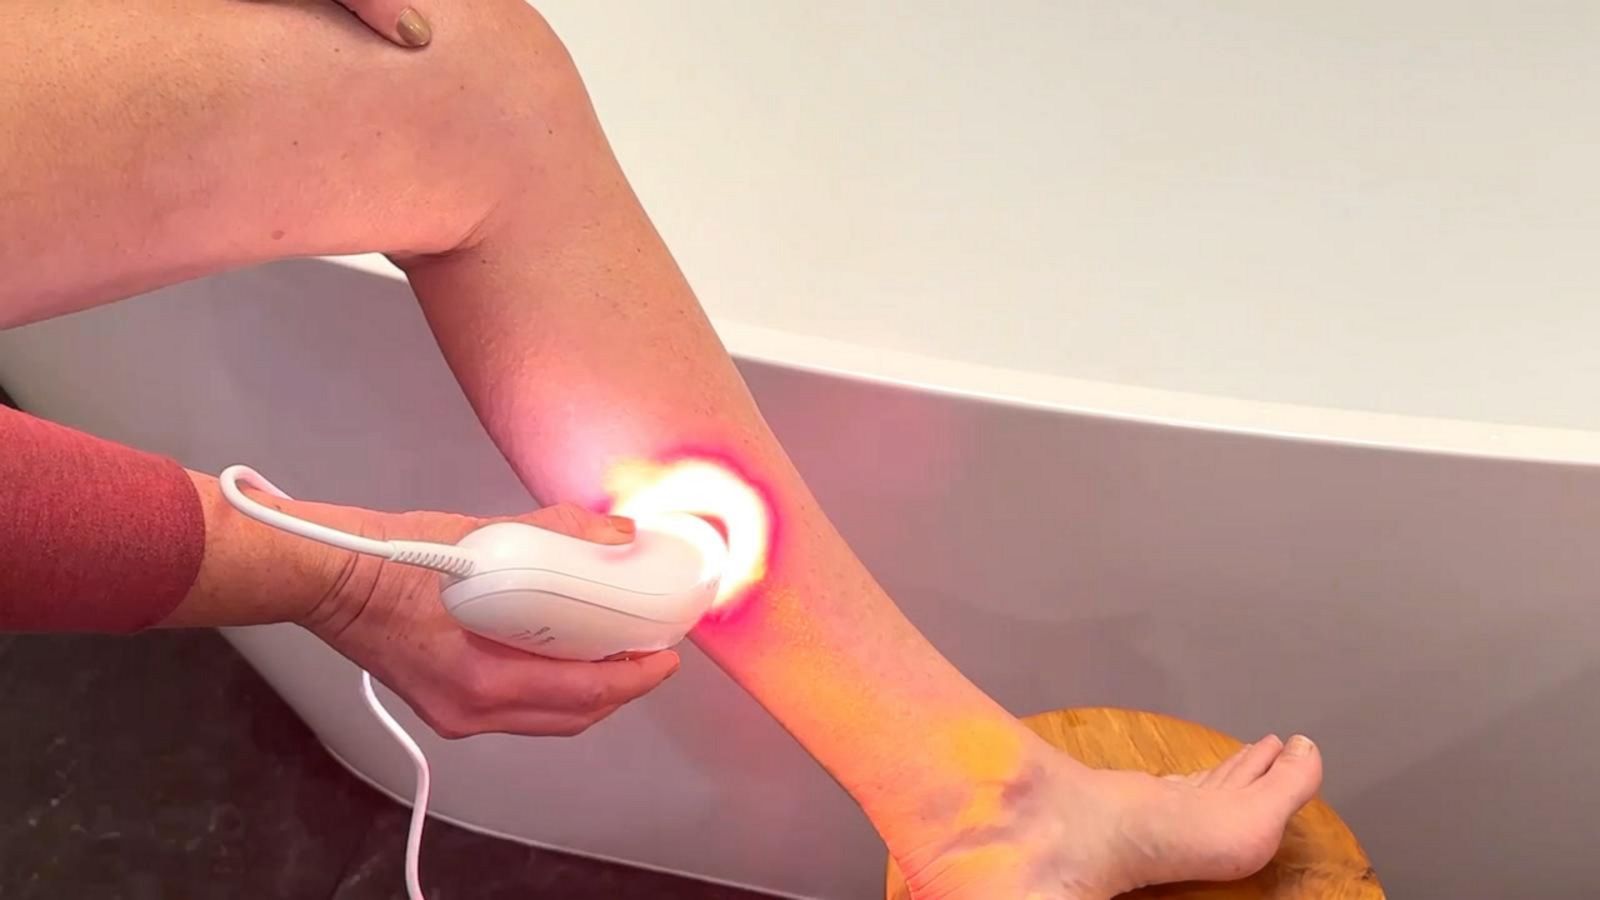 Testing at-home laser hair removal devices - Good Morning America